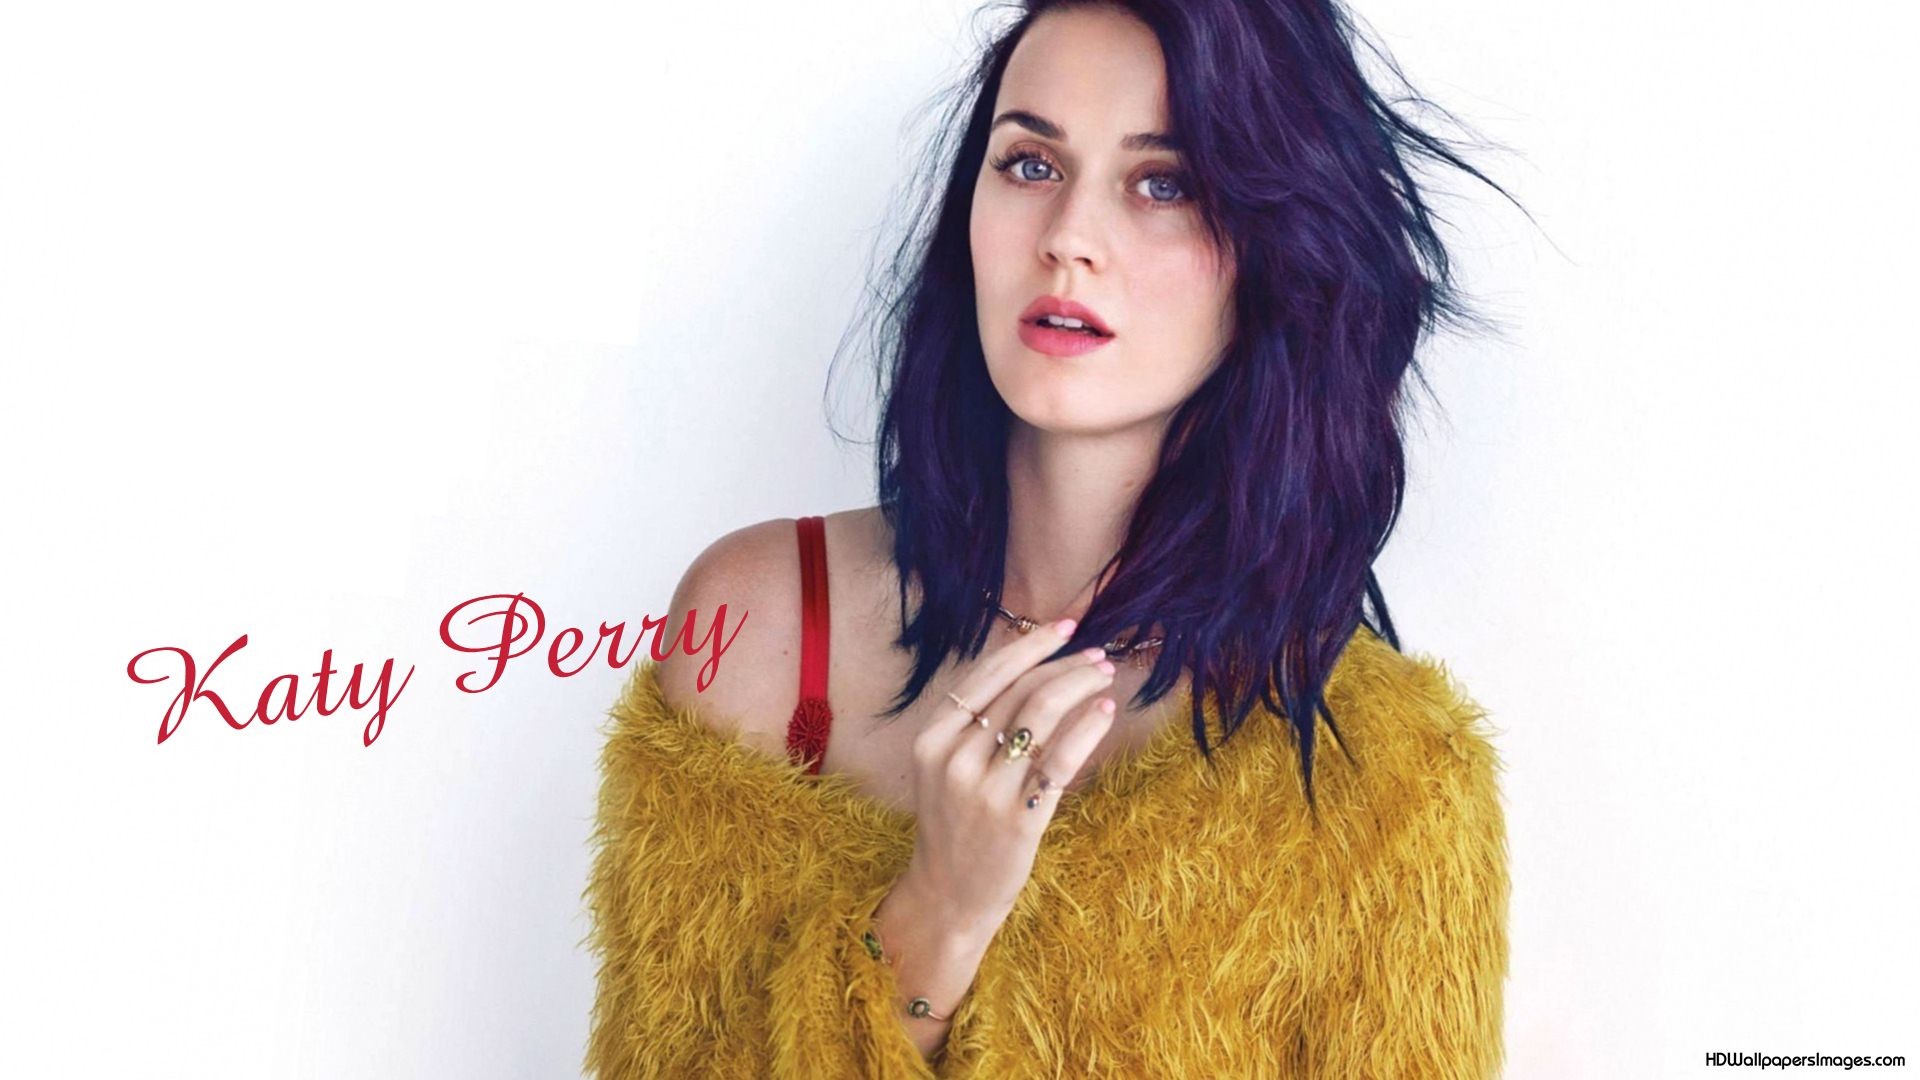 Katy Perry Prism Photoshoot Wallpapers